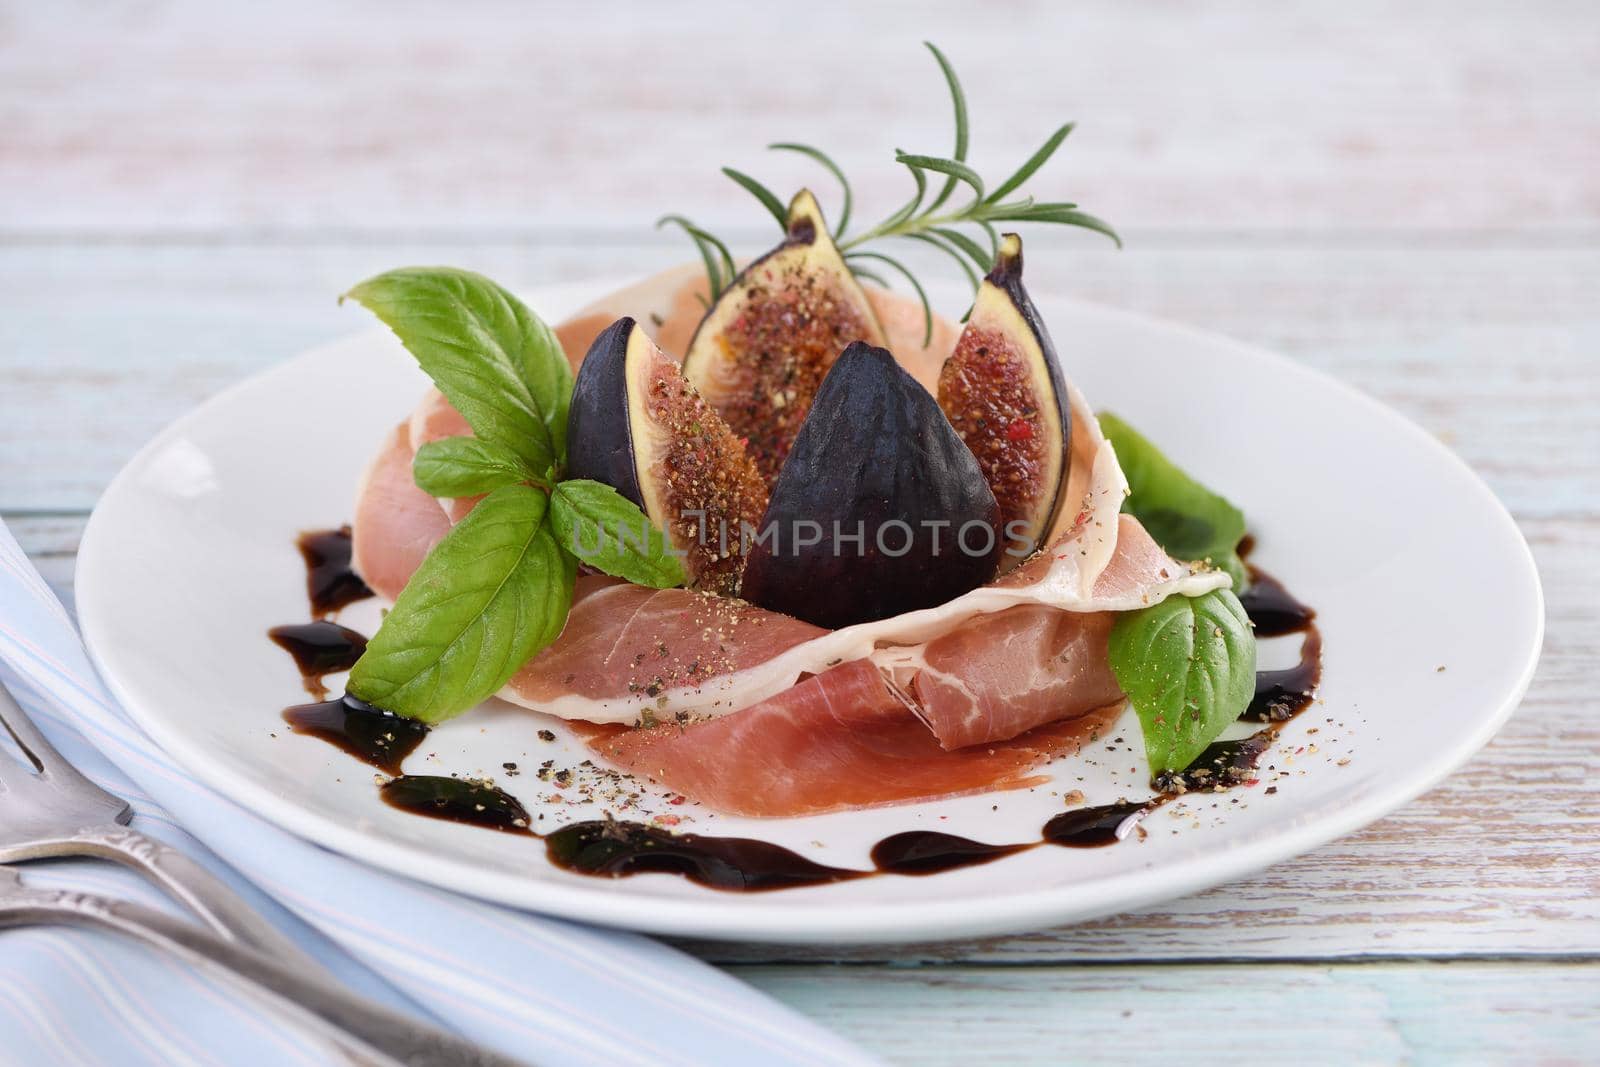 The delicate taste of prosciutto is ideally combined with the sweetness of figs.